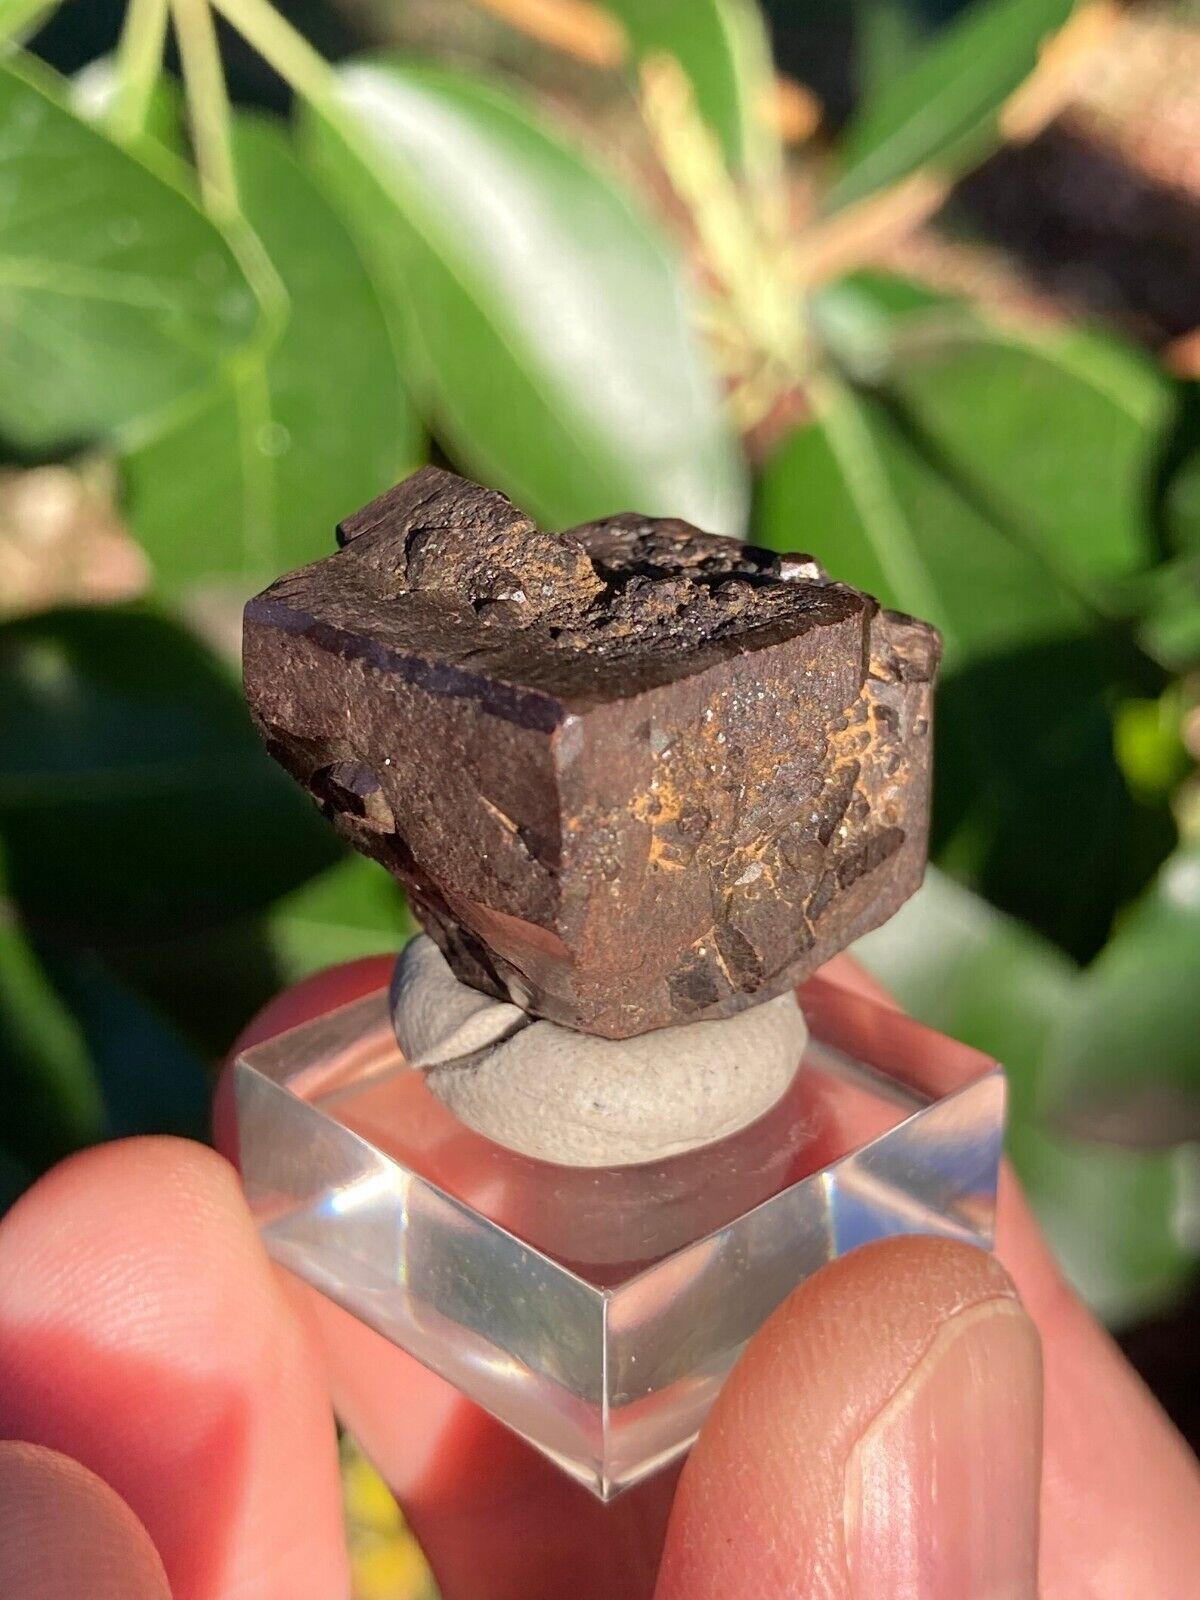 Cool Cubic Limonite Crystal • 28 Grams From Morocco Rare Limonite 6